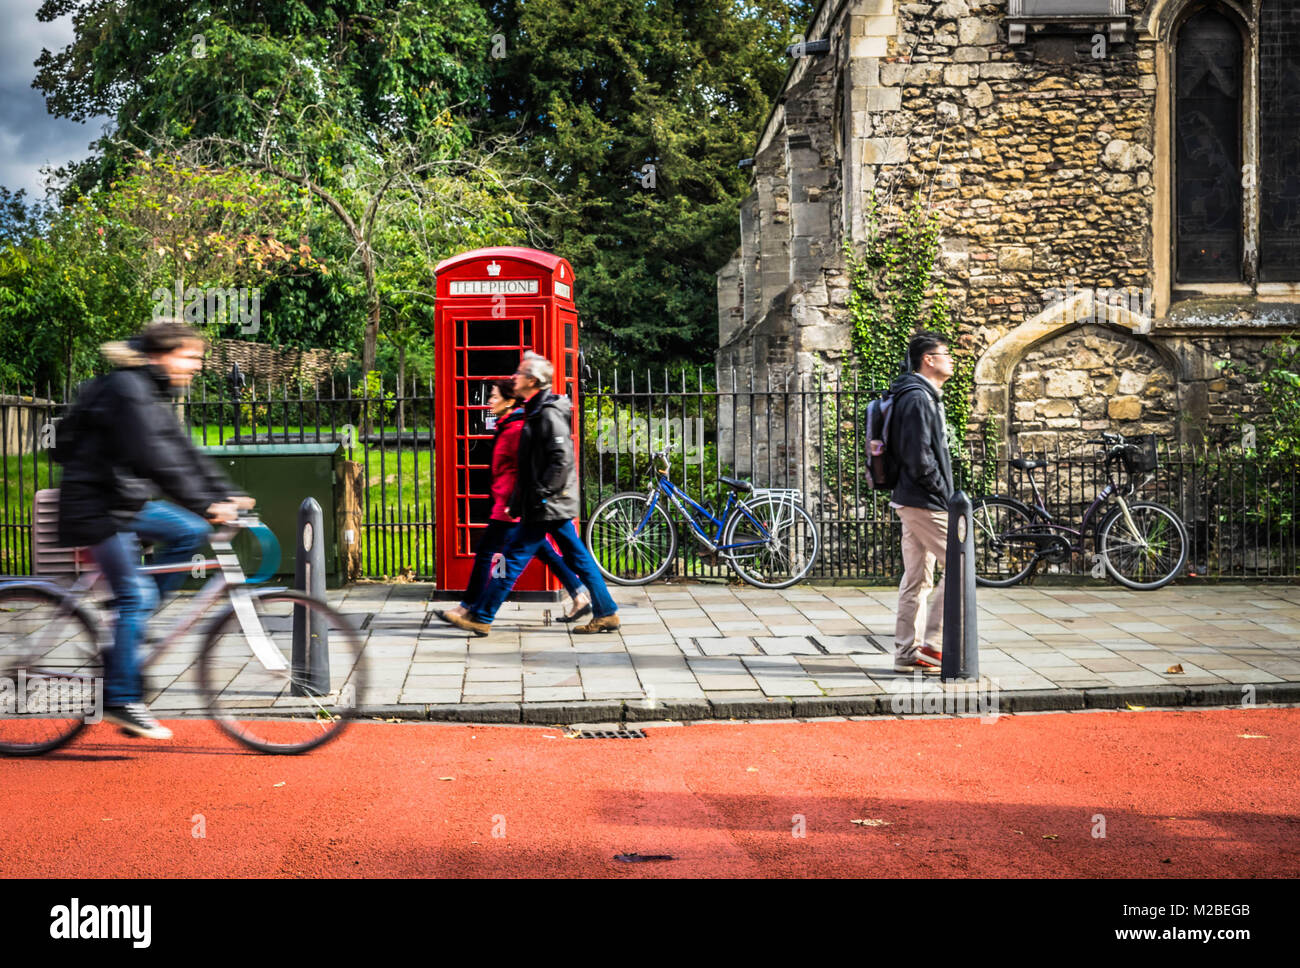 A phone box in Cambridge with motion blurred people and bikes Stock Photo